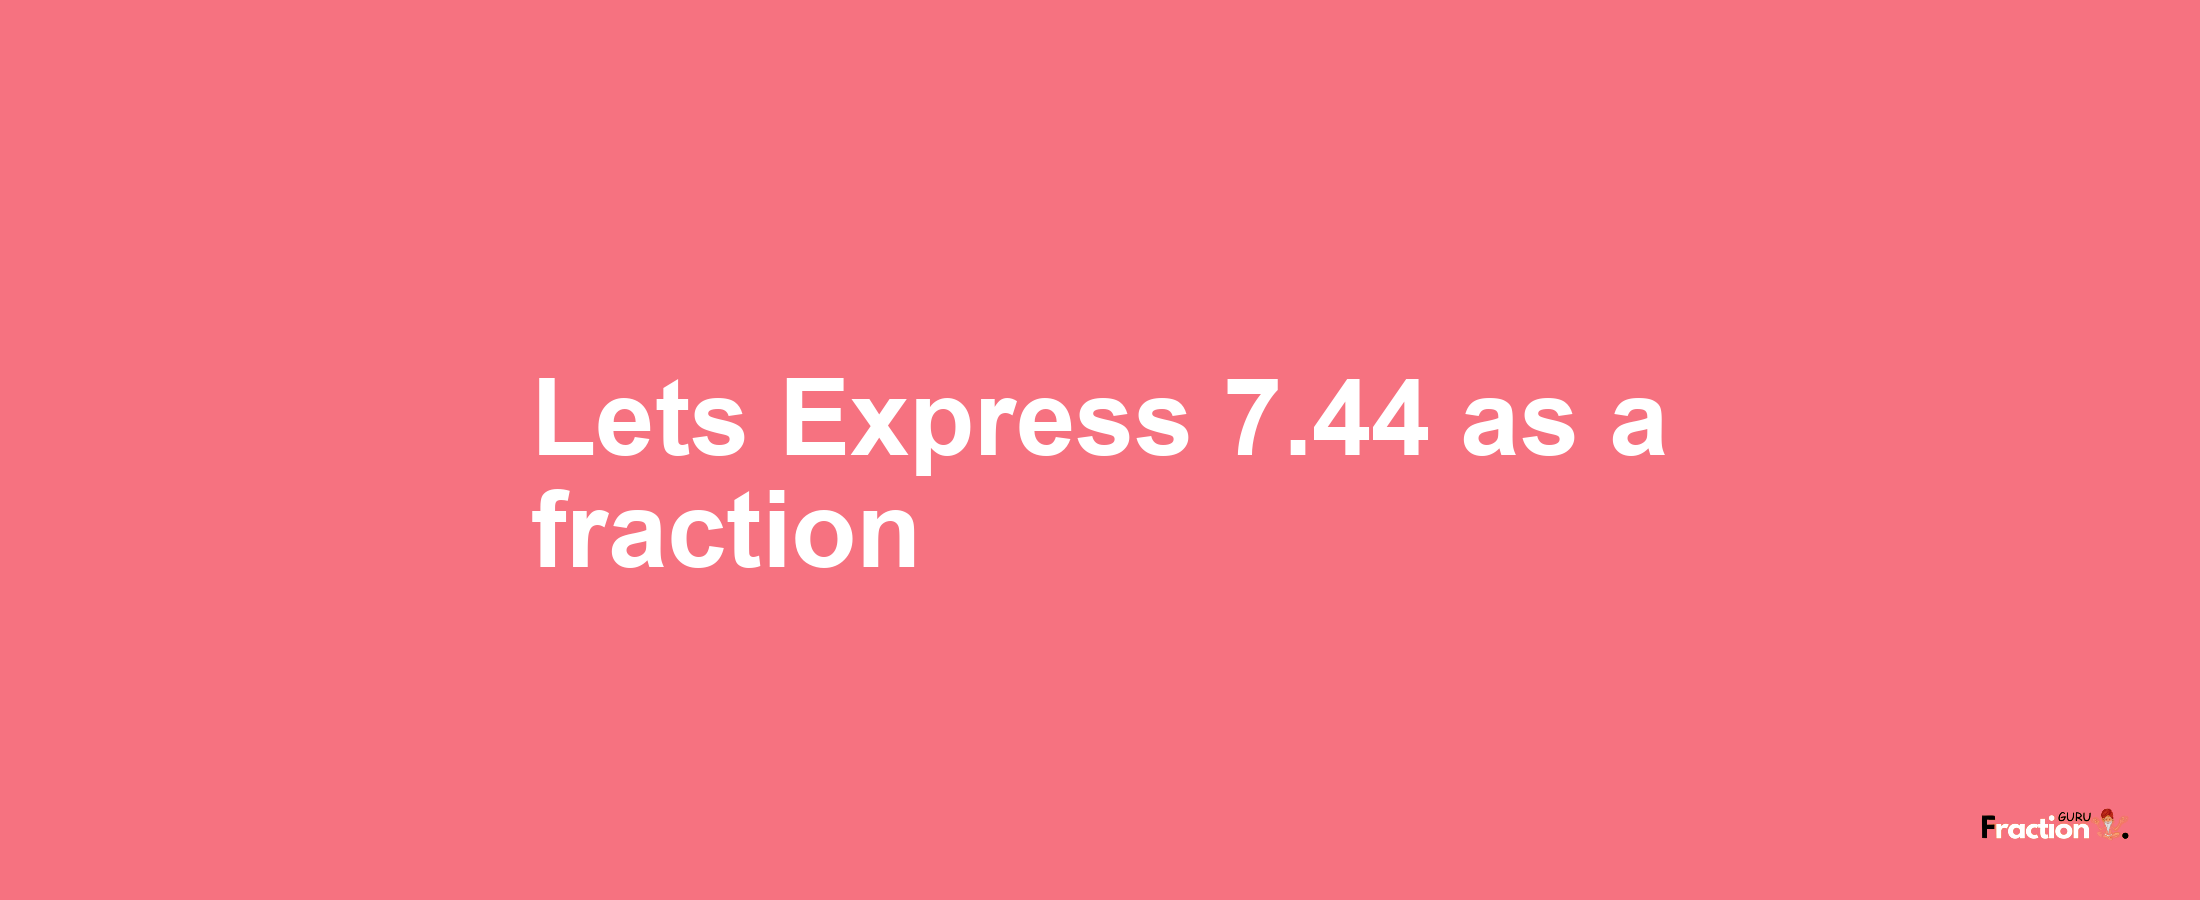 Lets Express 7.44 as afraction